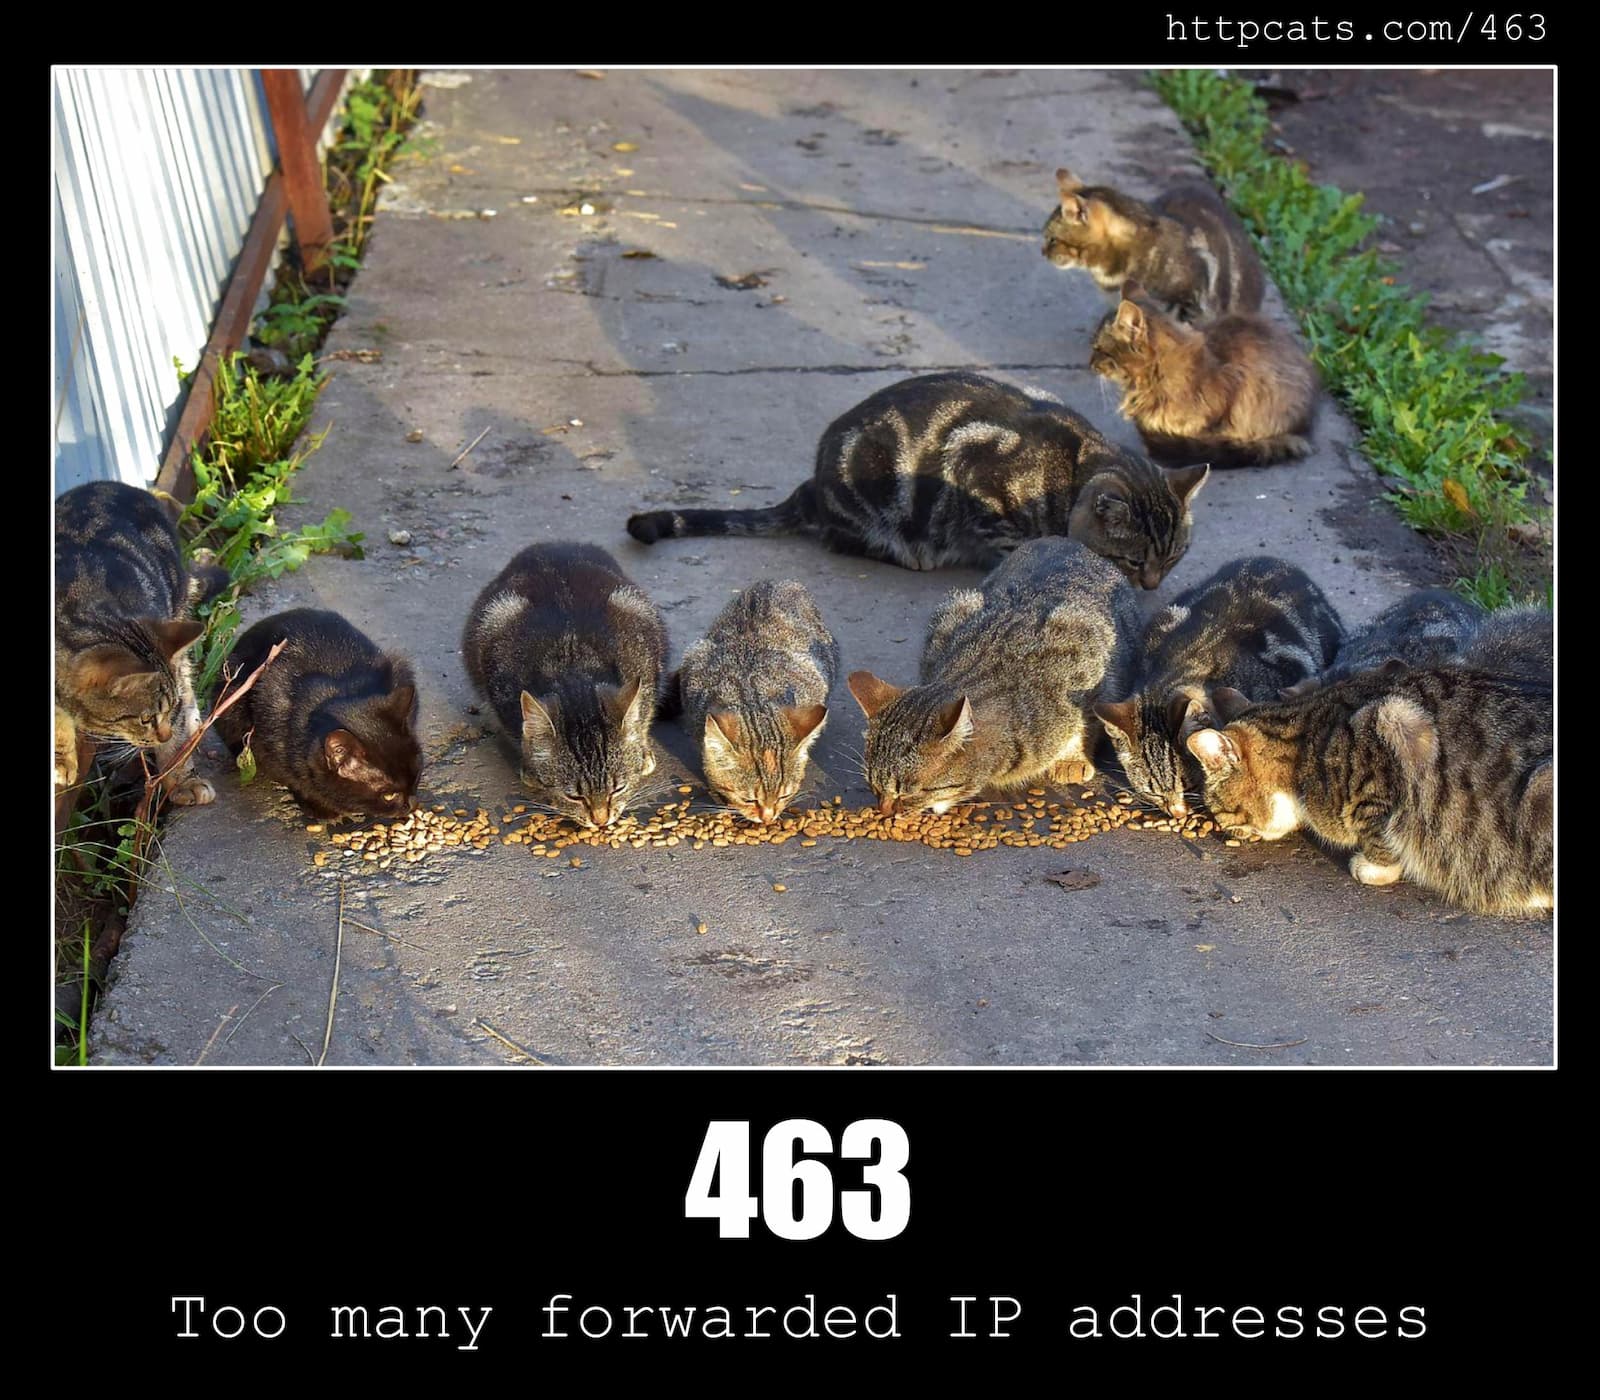 HTTP Status Code 463 Too many forwarded IP addresses & Cats